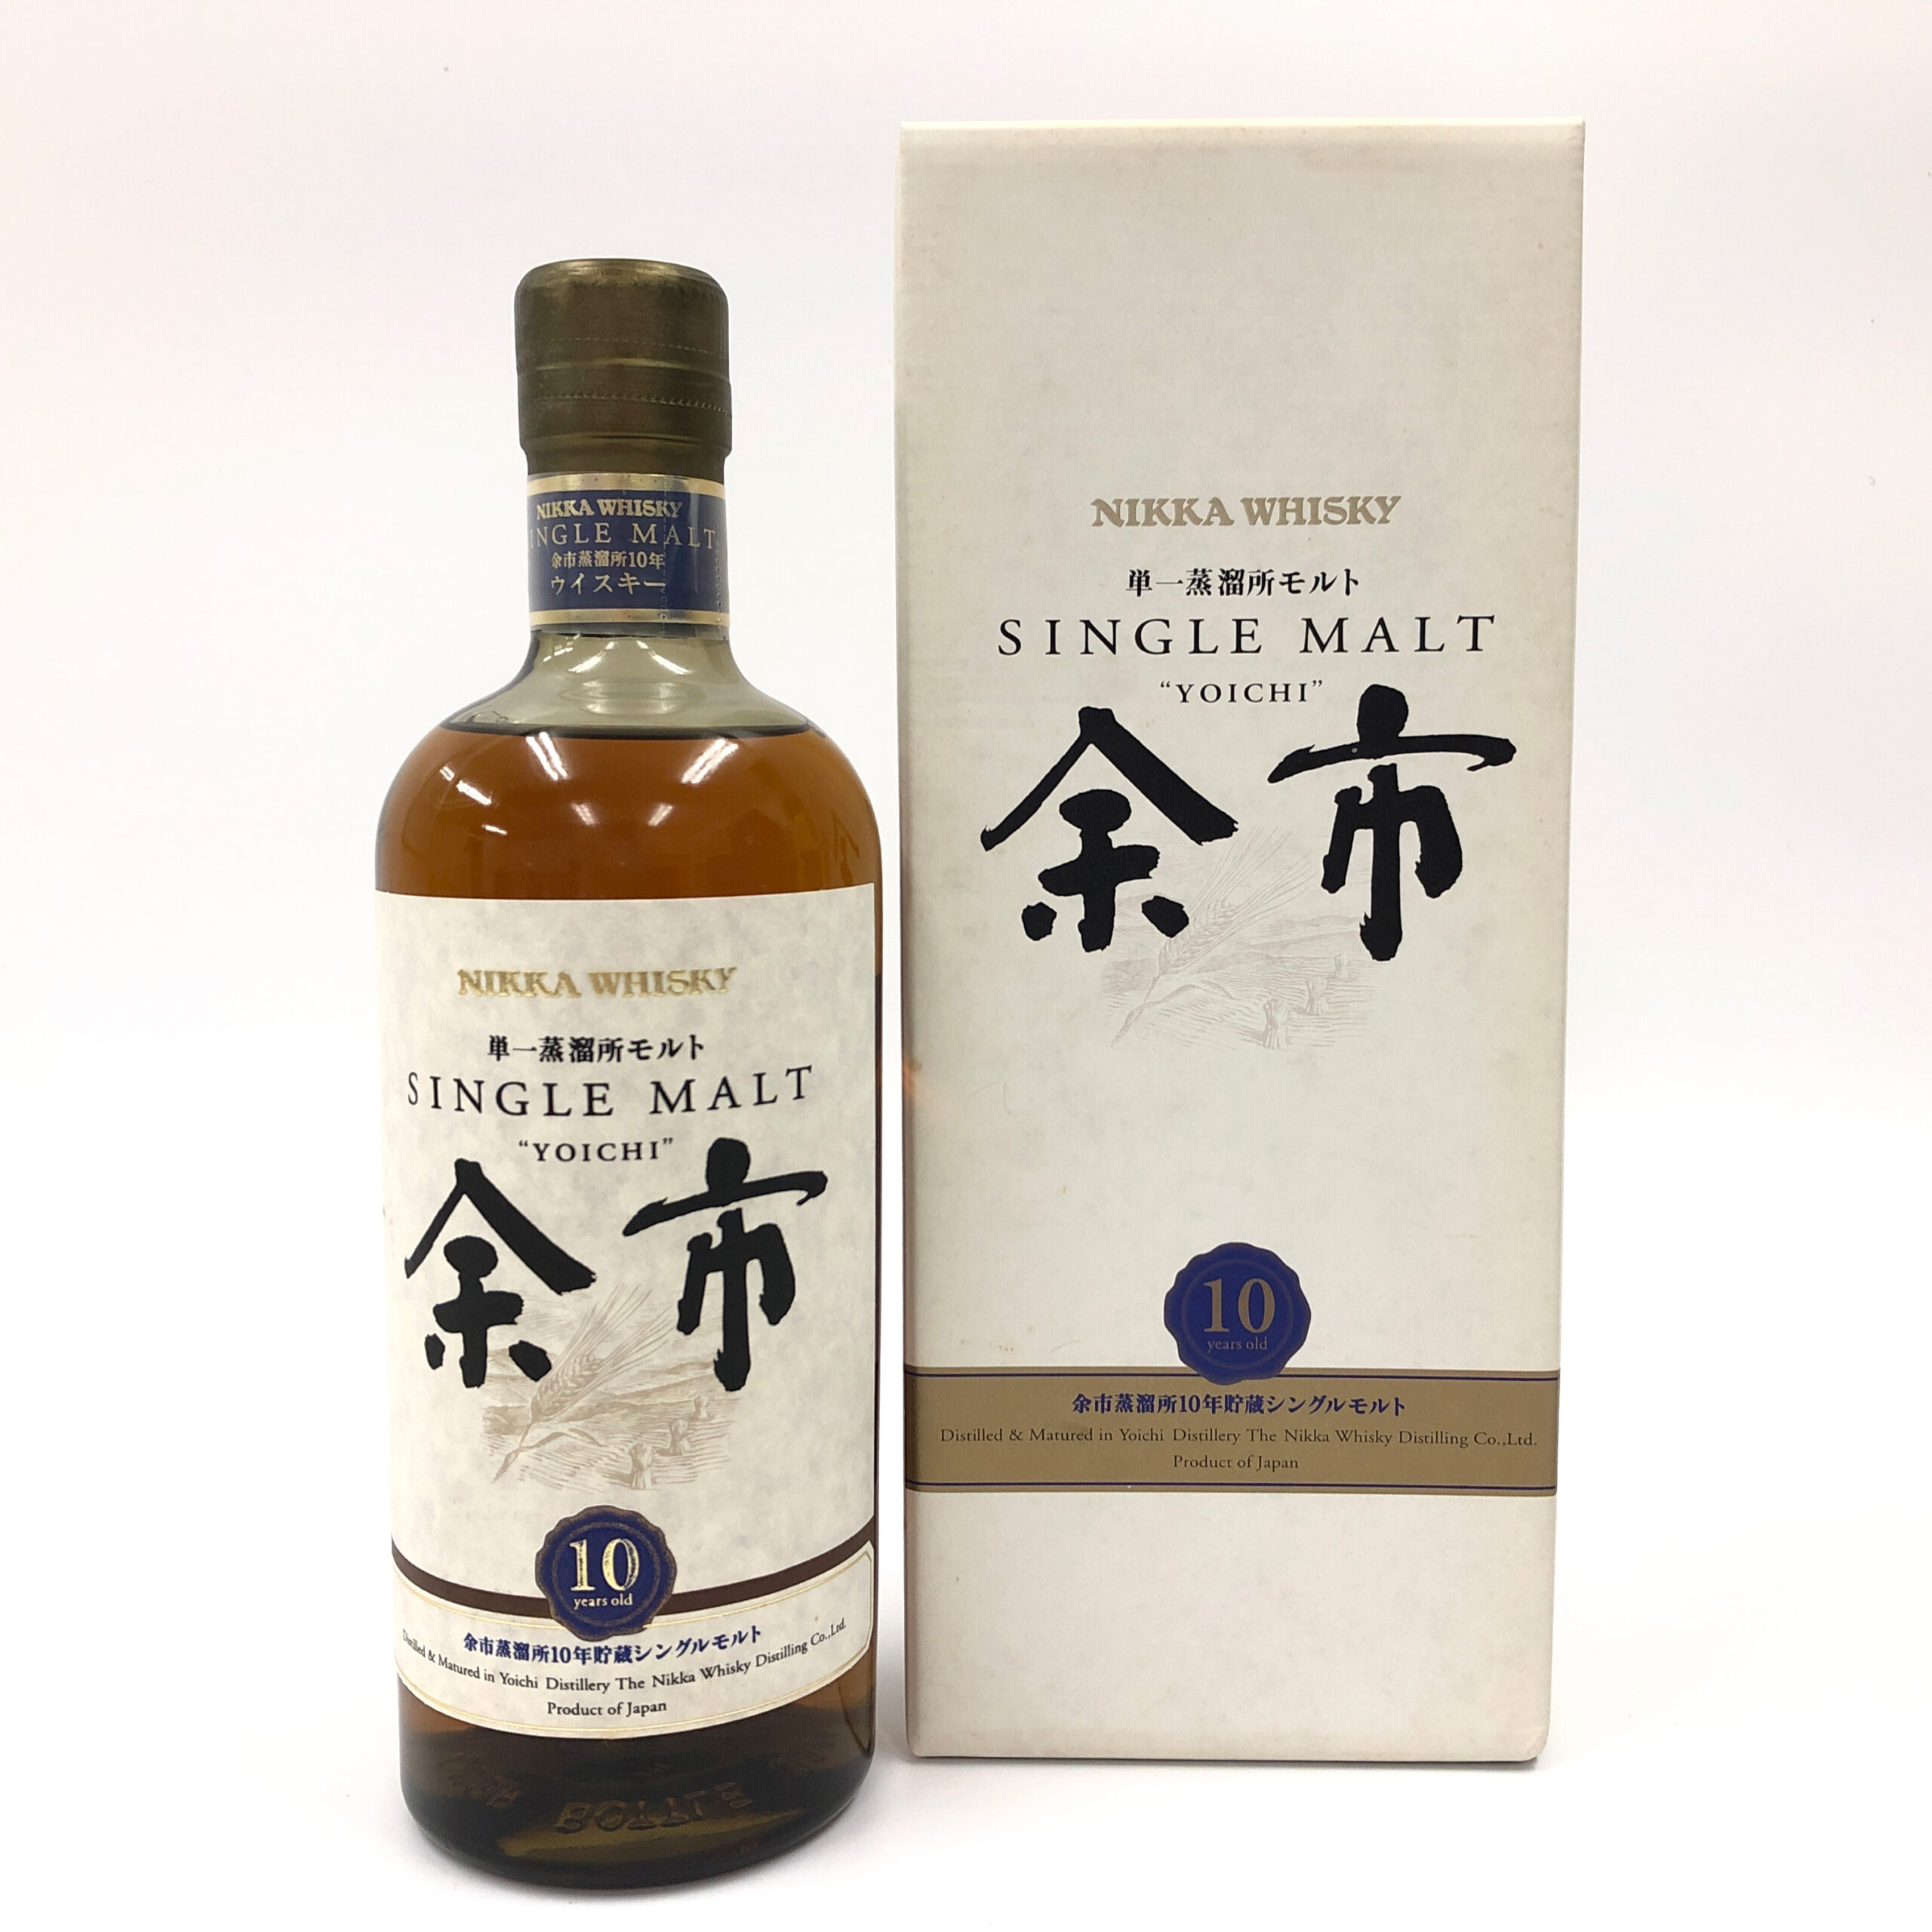 【Nikka Yoichi series】「Nikka Yoichi 10year.」Single malt produced at the distillery in Yoichi, Hokkaido. The taste is strong and heavy. Sometimes it is expressed as “Yoichi malt smells like the sea”. It is said that the distillery's proximity to the sea in the wilderness of the north allows the sea breeze to seep into the casks and blend into the original spirit.